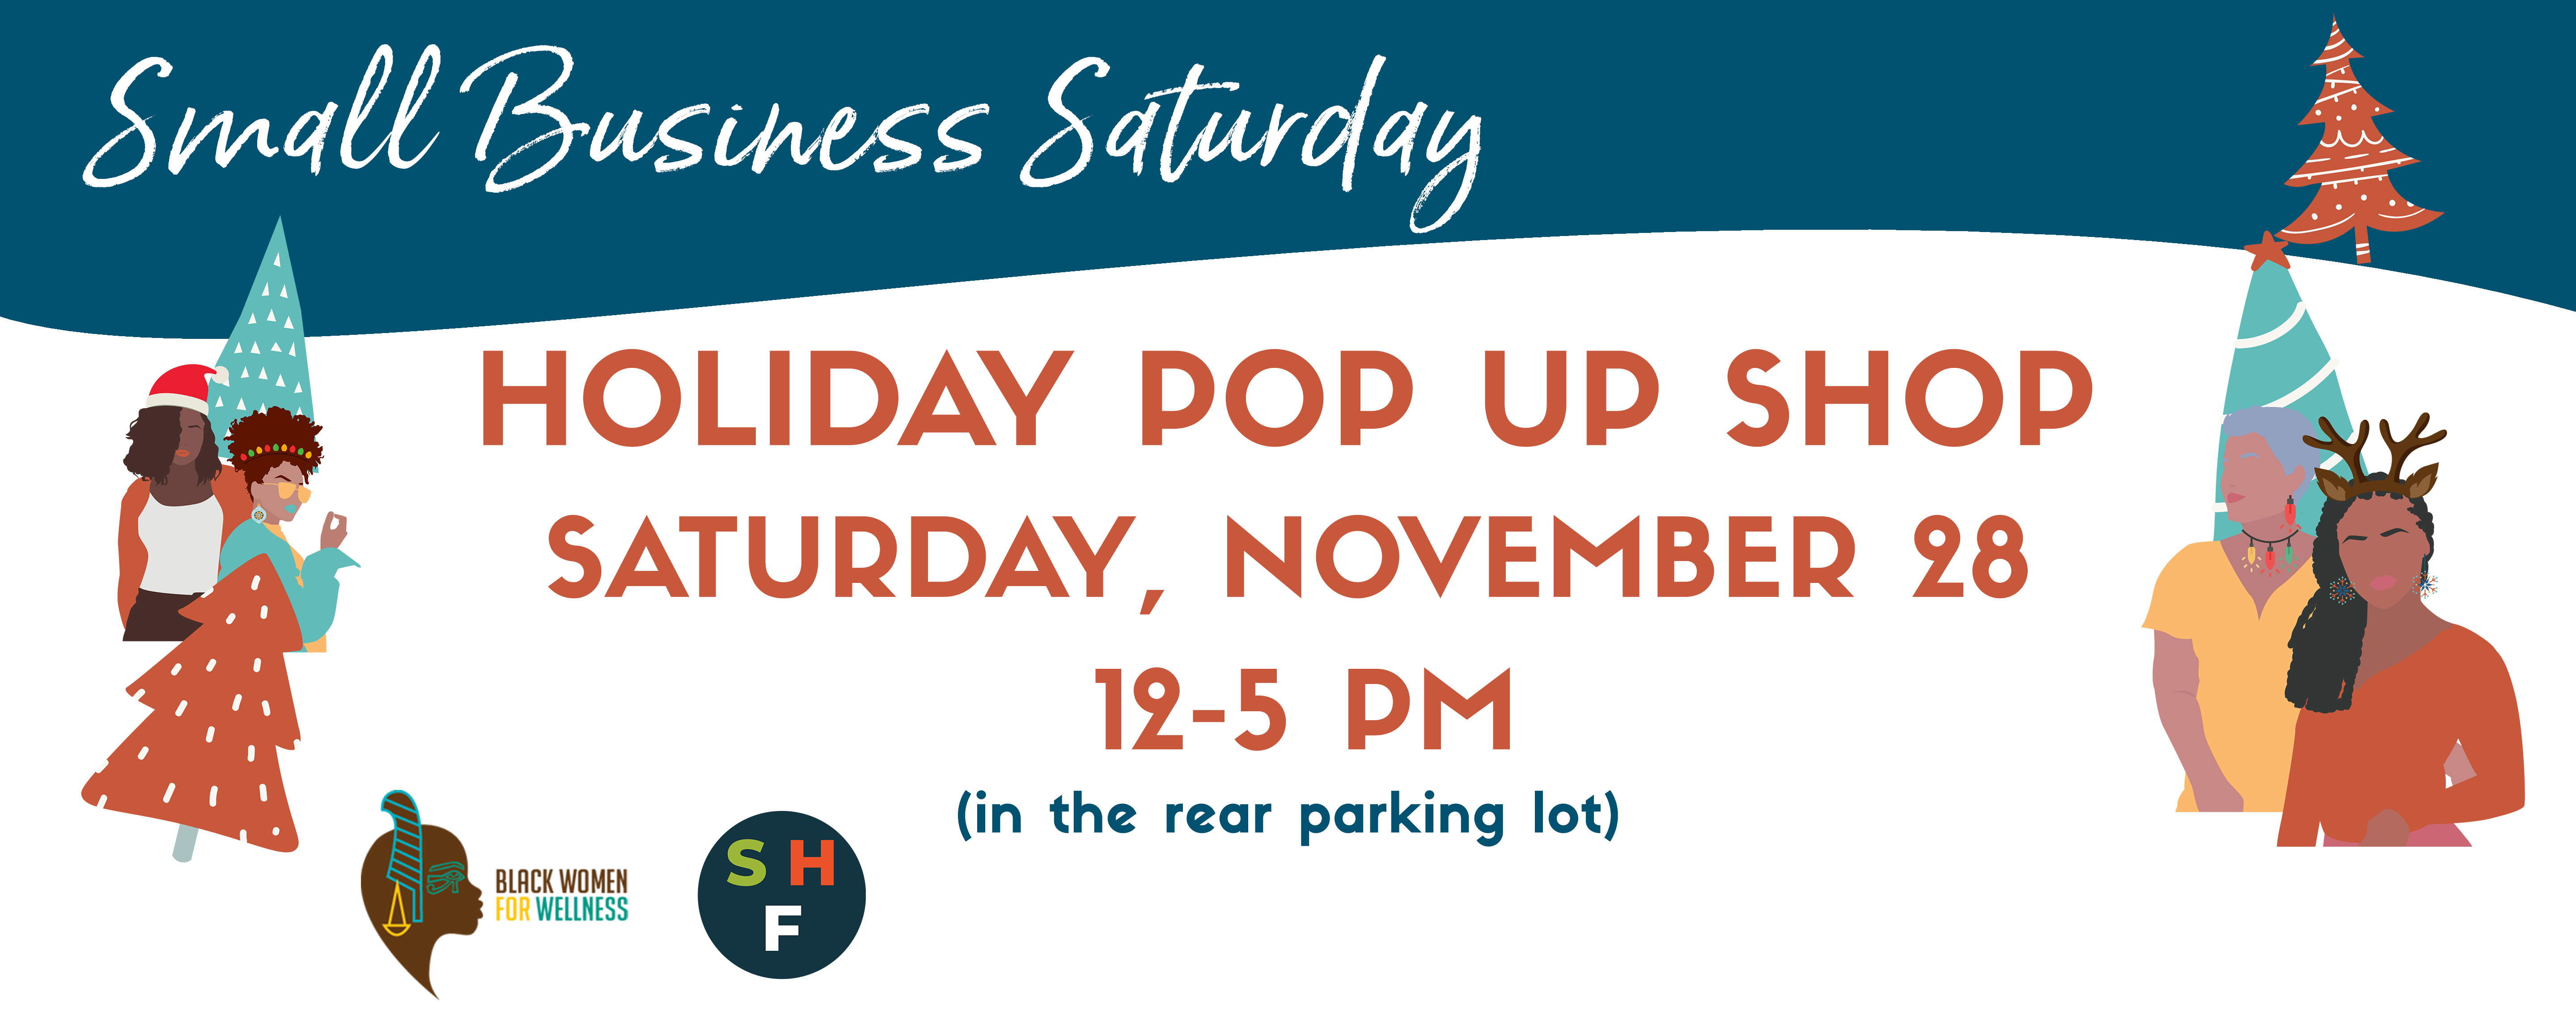 Free COVID-19 Testing + Small Business Saturday Pop Up Shop | Leimert Park